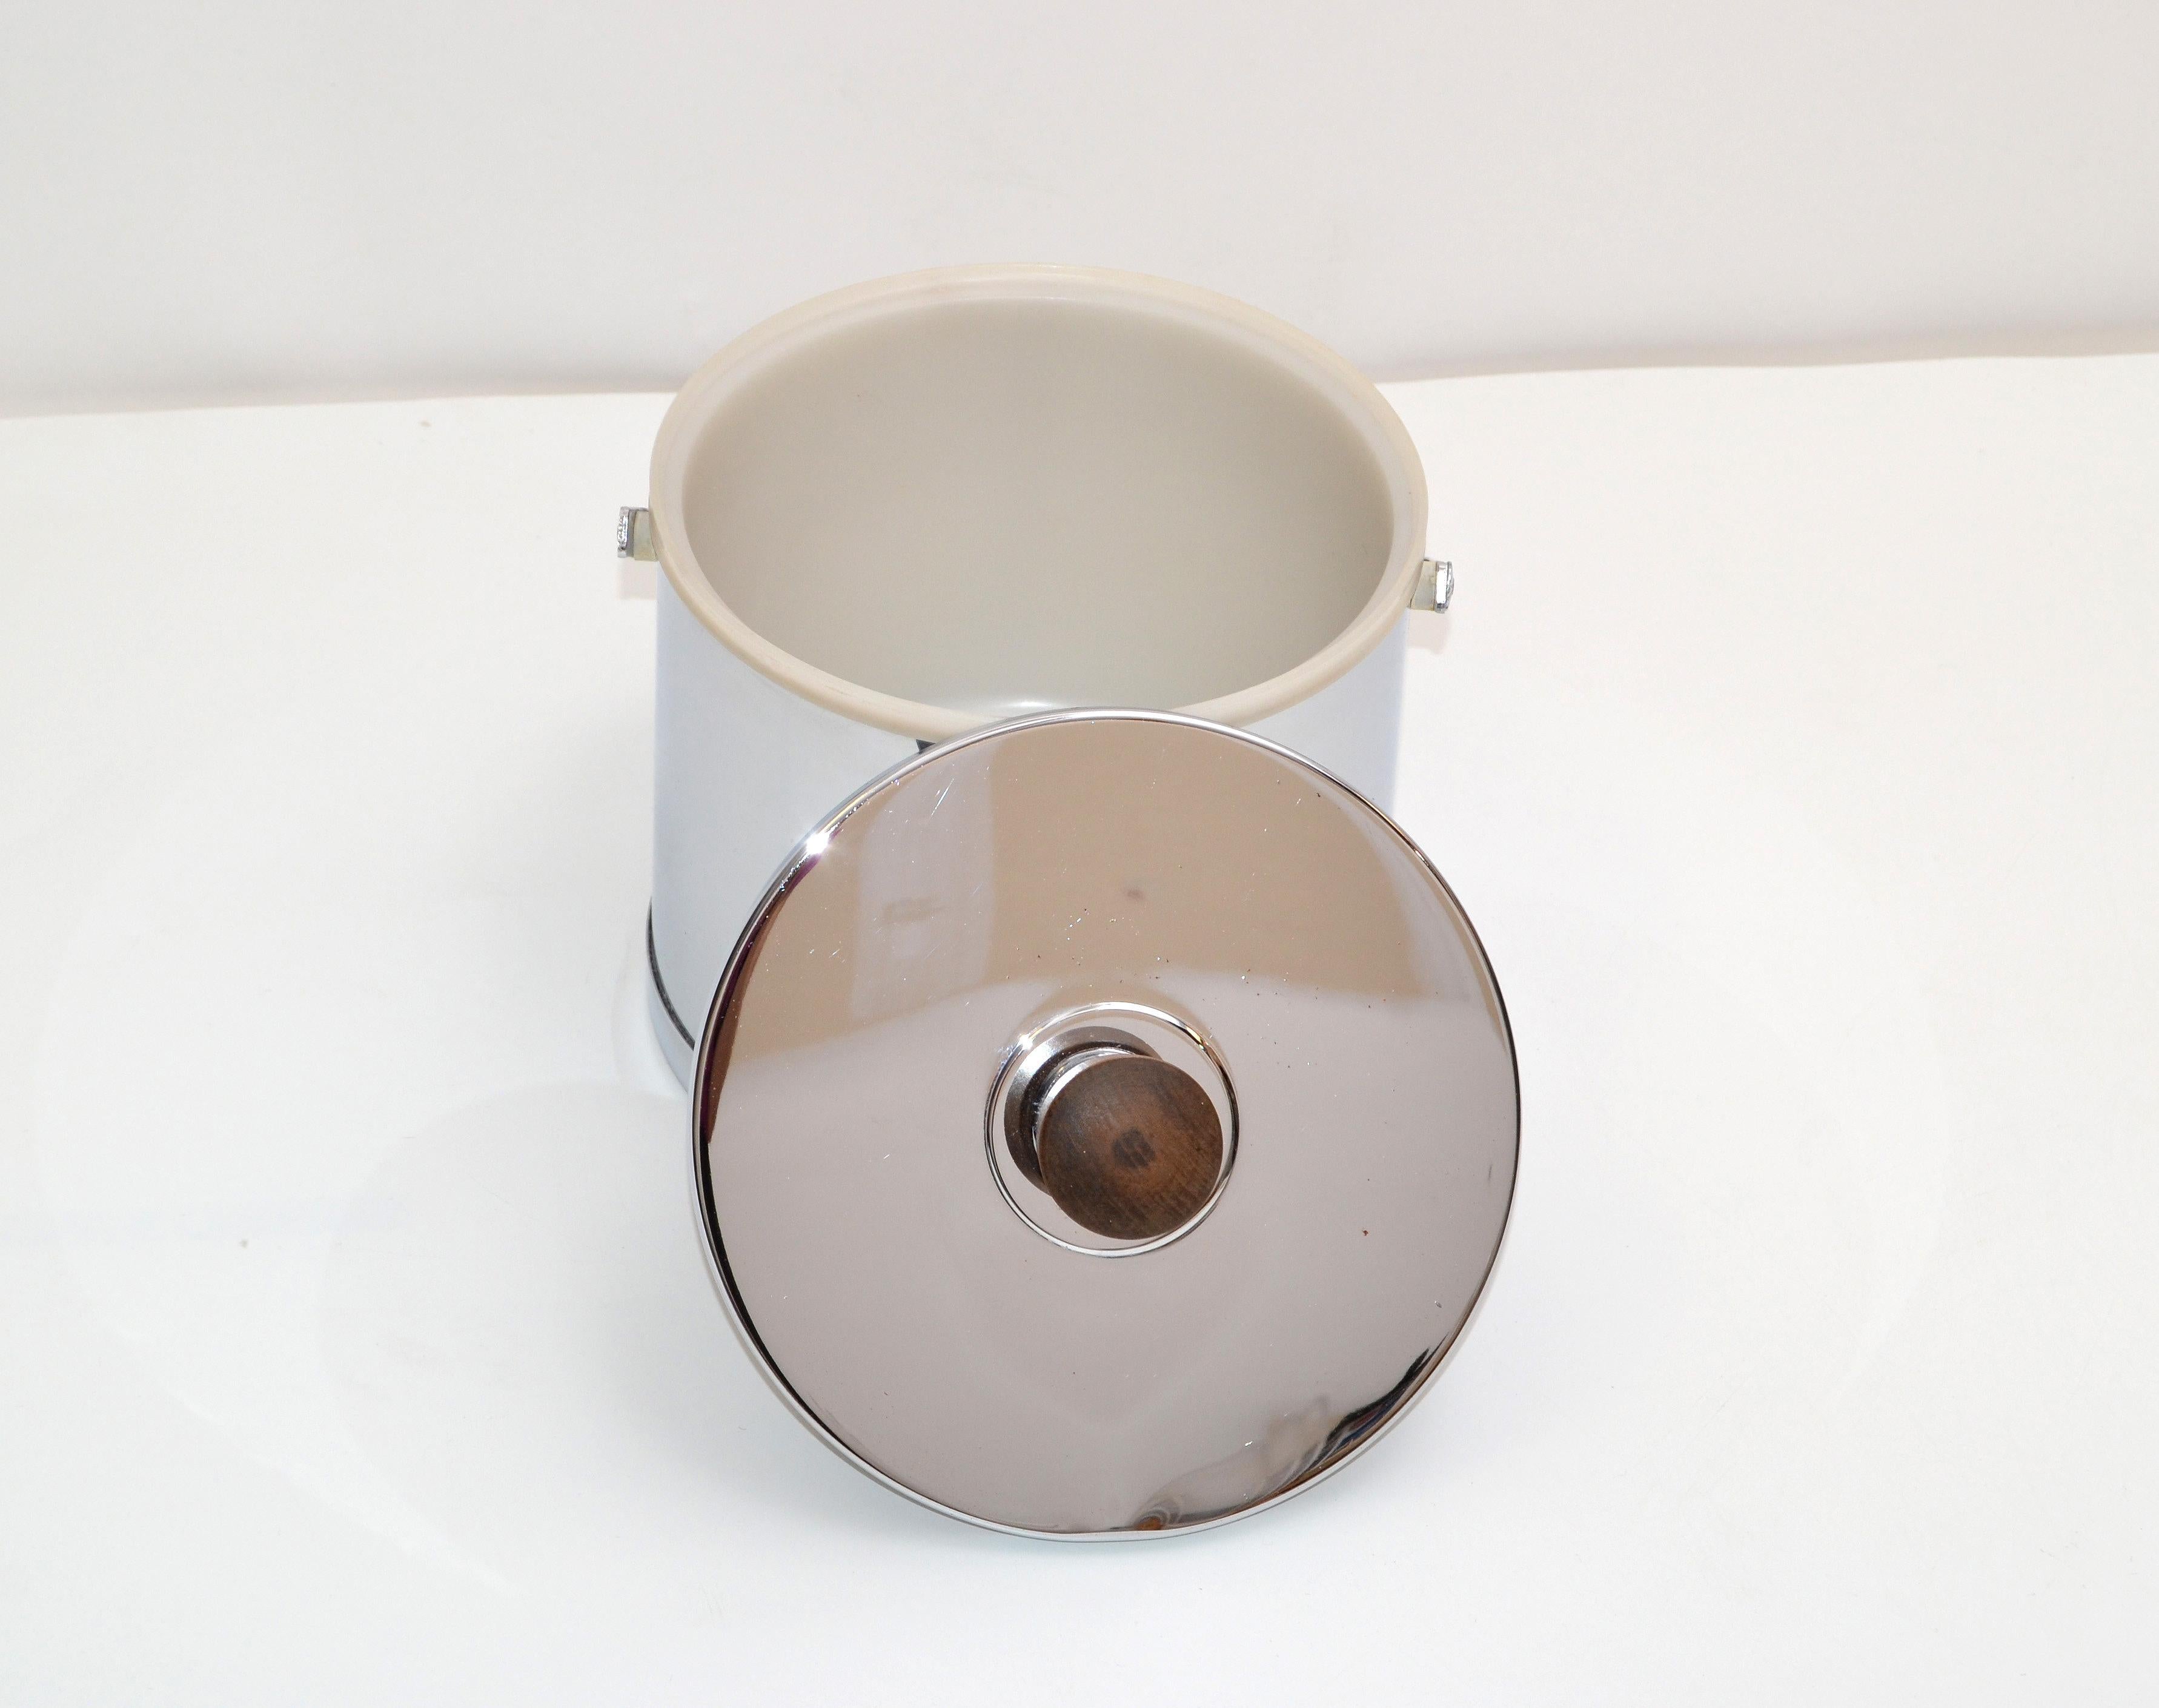 ATAPCO Inox Stainless Steel American Mid-Century Modern Ice Cooler Bucket 1970 In Good Condition For Sale In Miami, FL